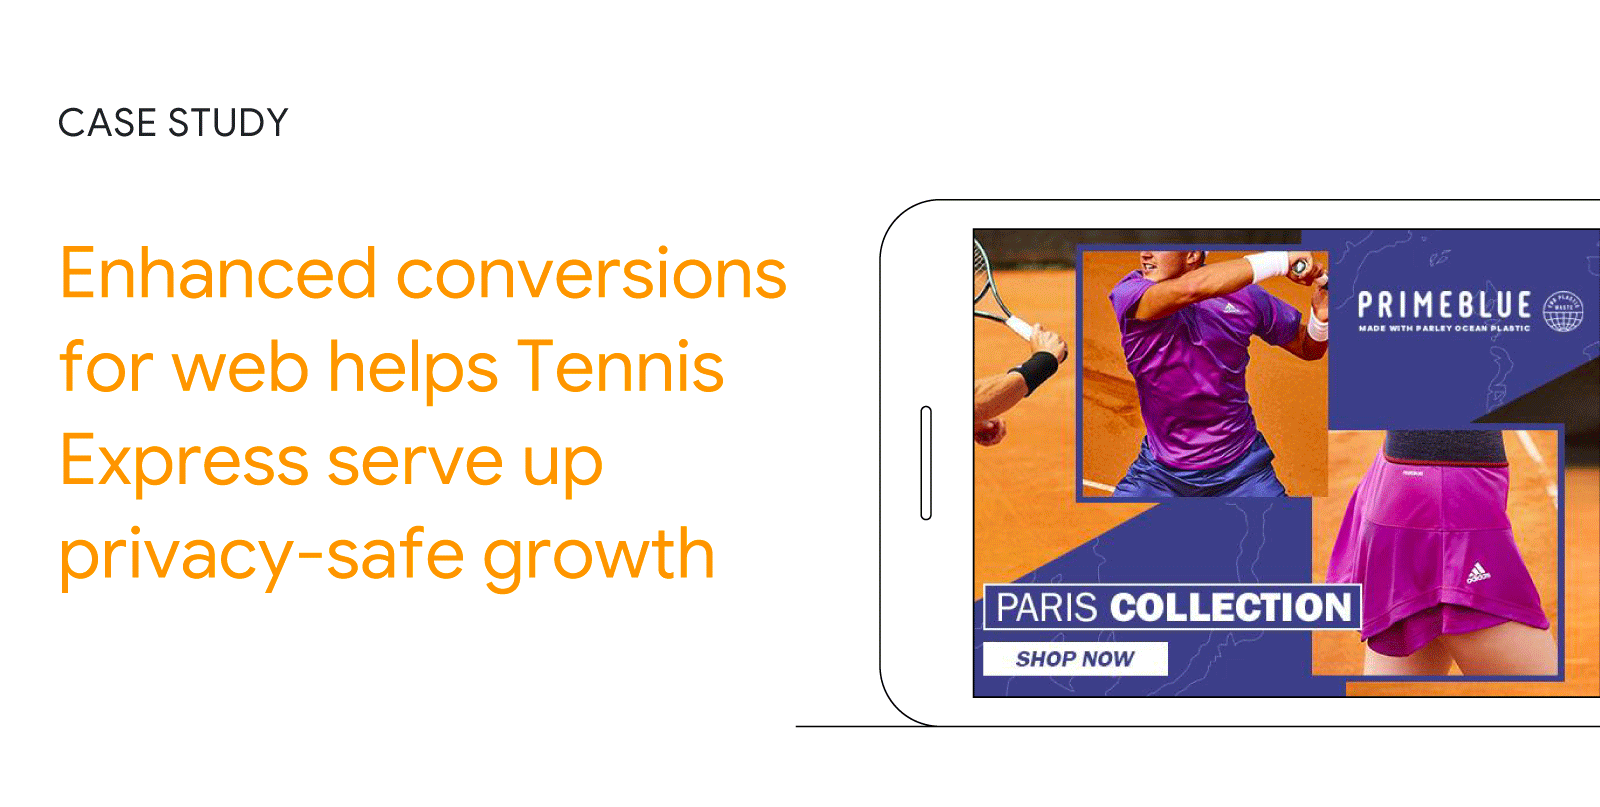 Case Study: Enhanced conversions for web helps Tennis Express serve up privacy-safe growth. A smartphone displays images of tennis-related sportswear showing the Paris Collection from Primeblue.